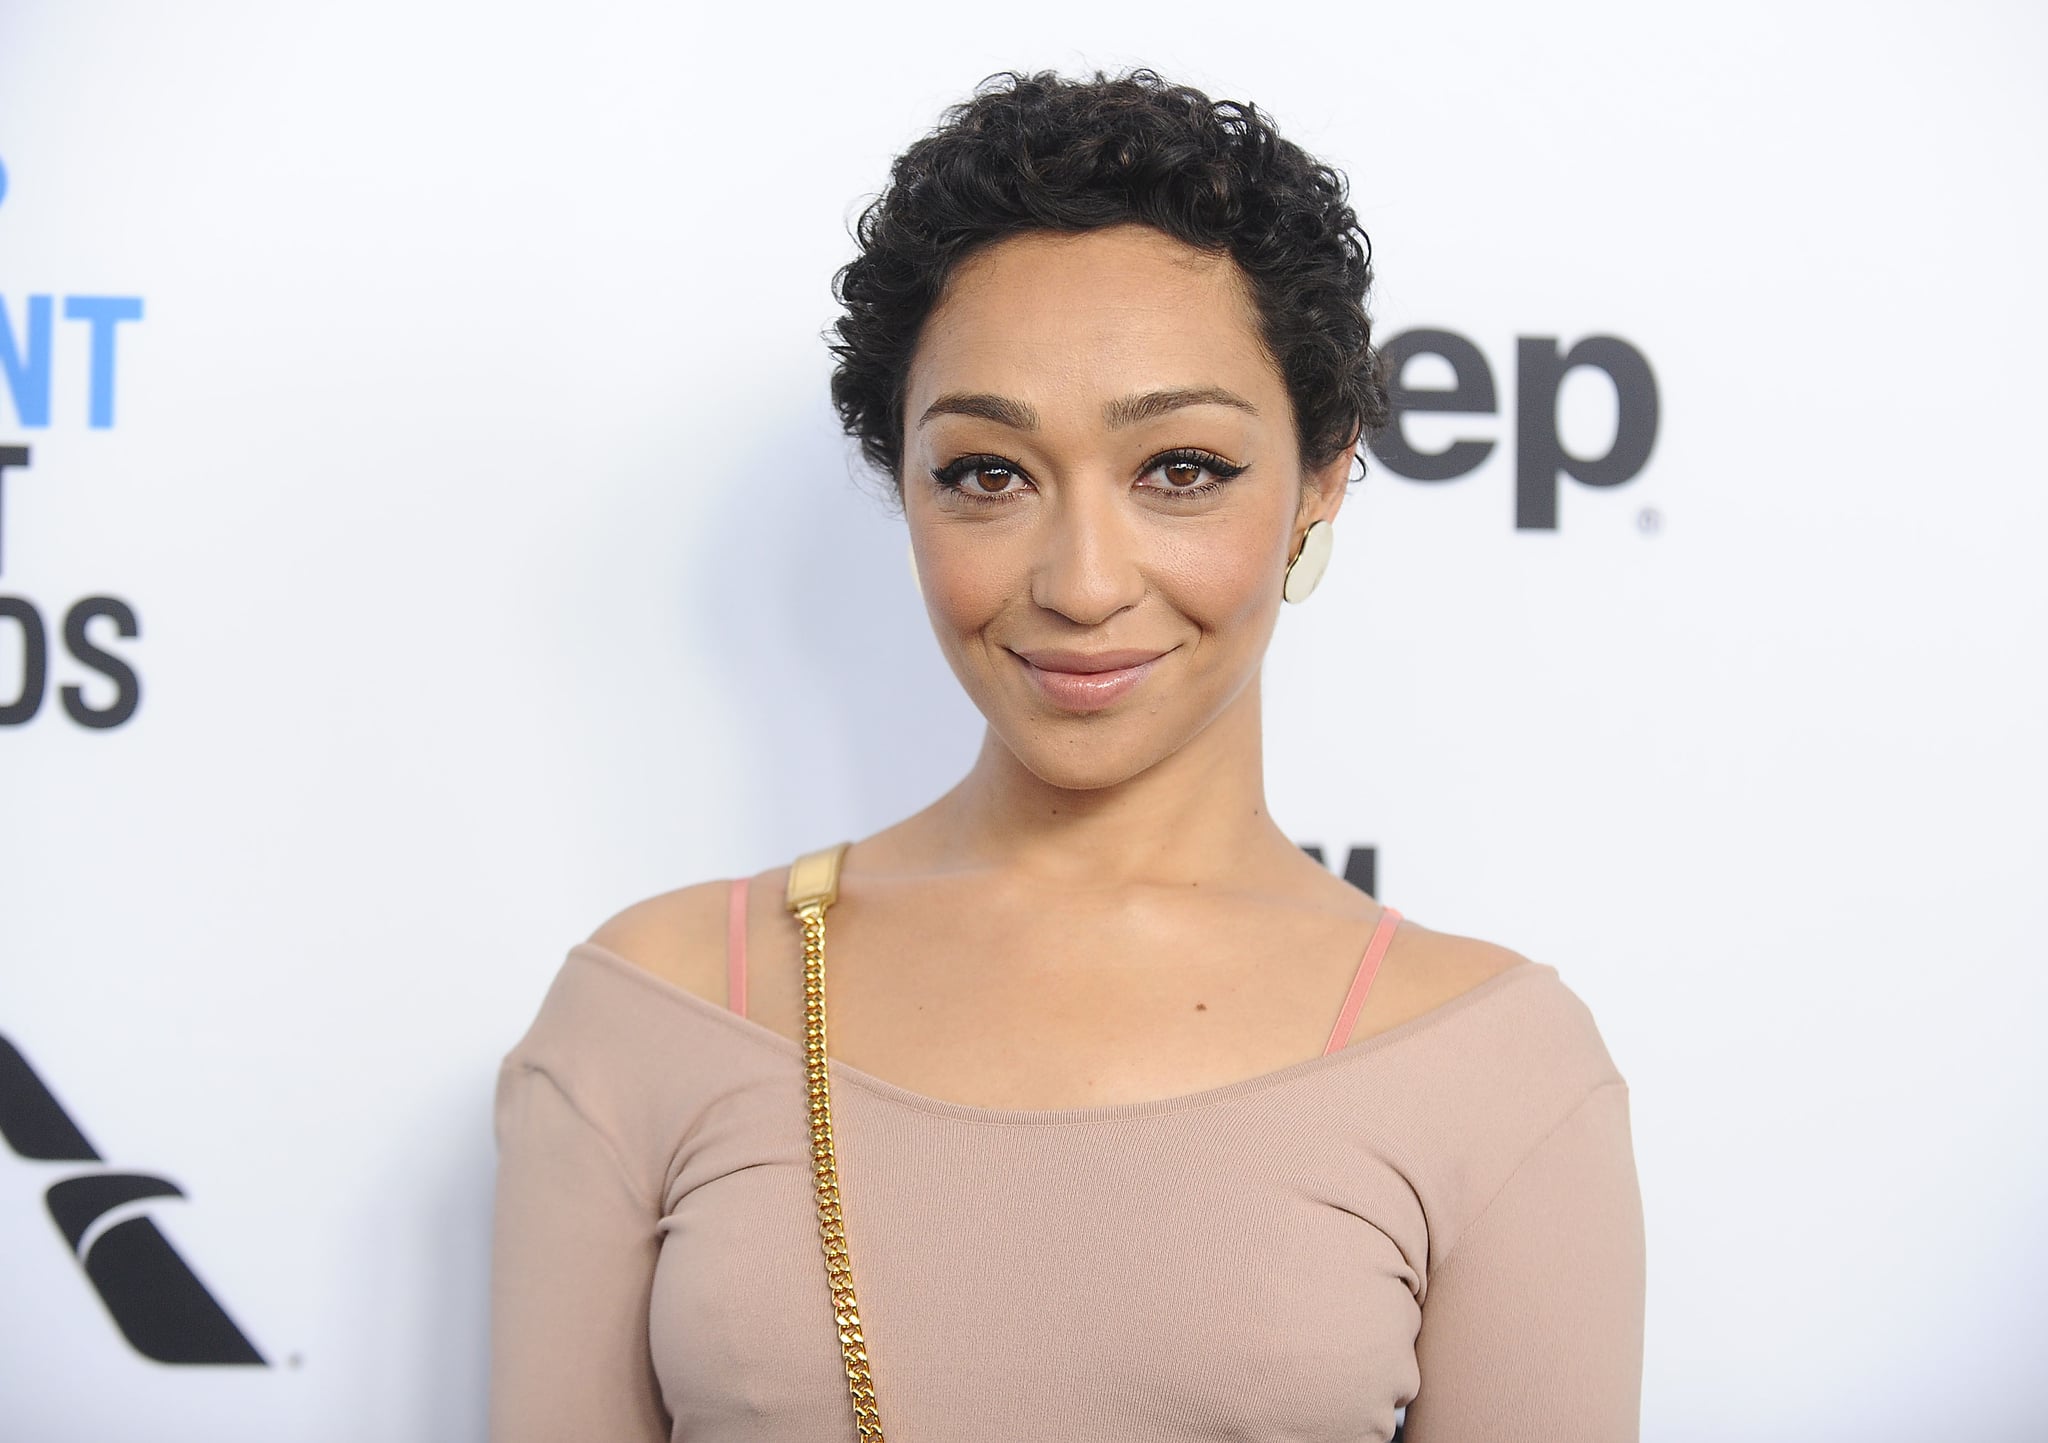 12 Things to Know About Ruth Negga Before She Heads to the Oscars.